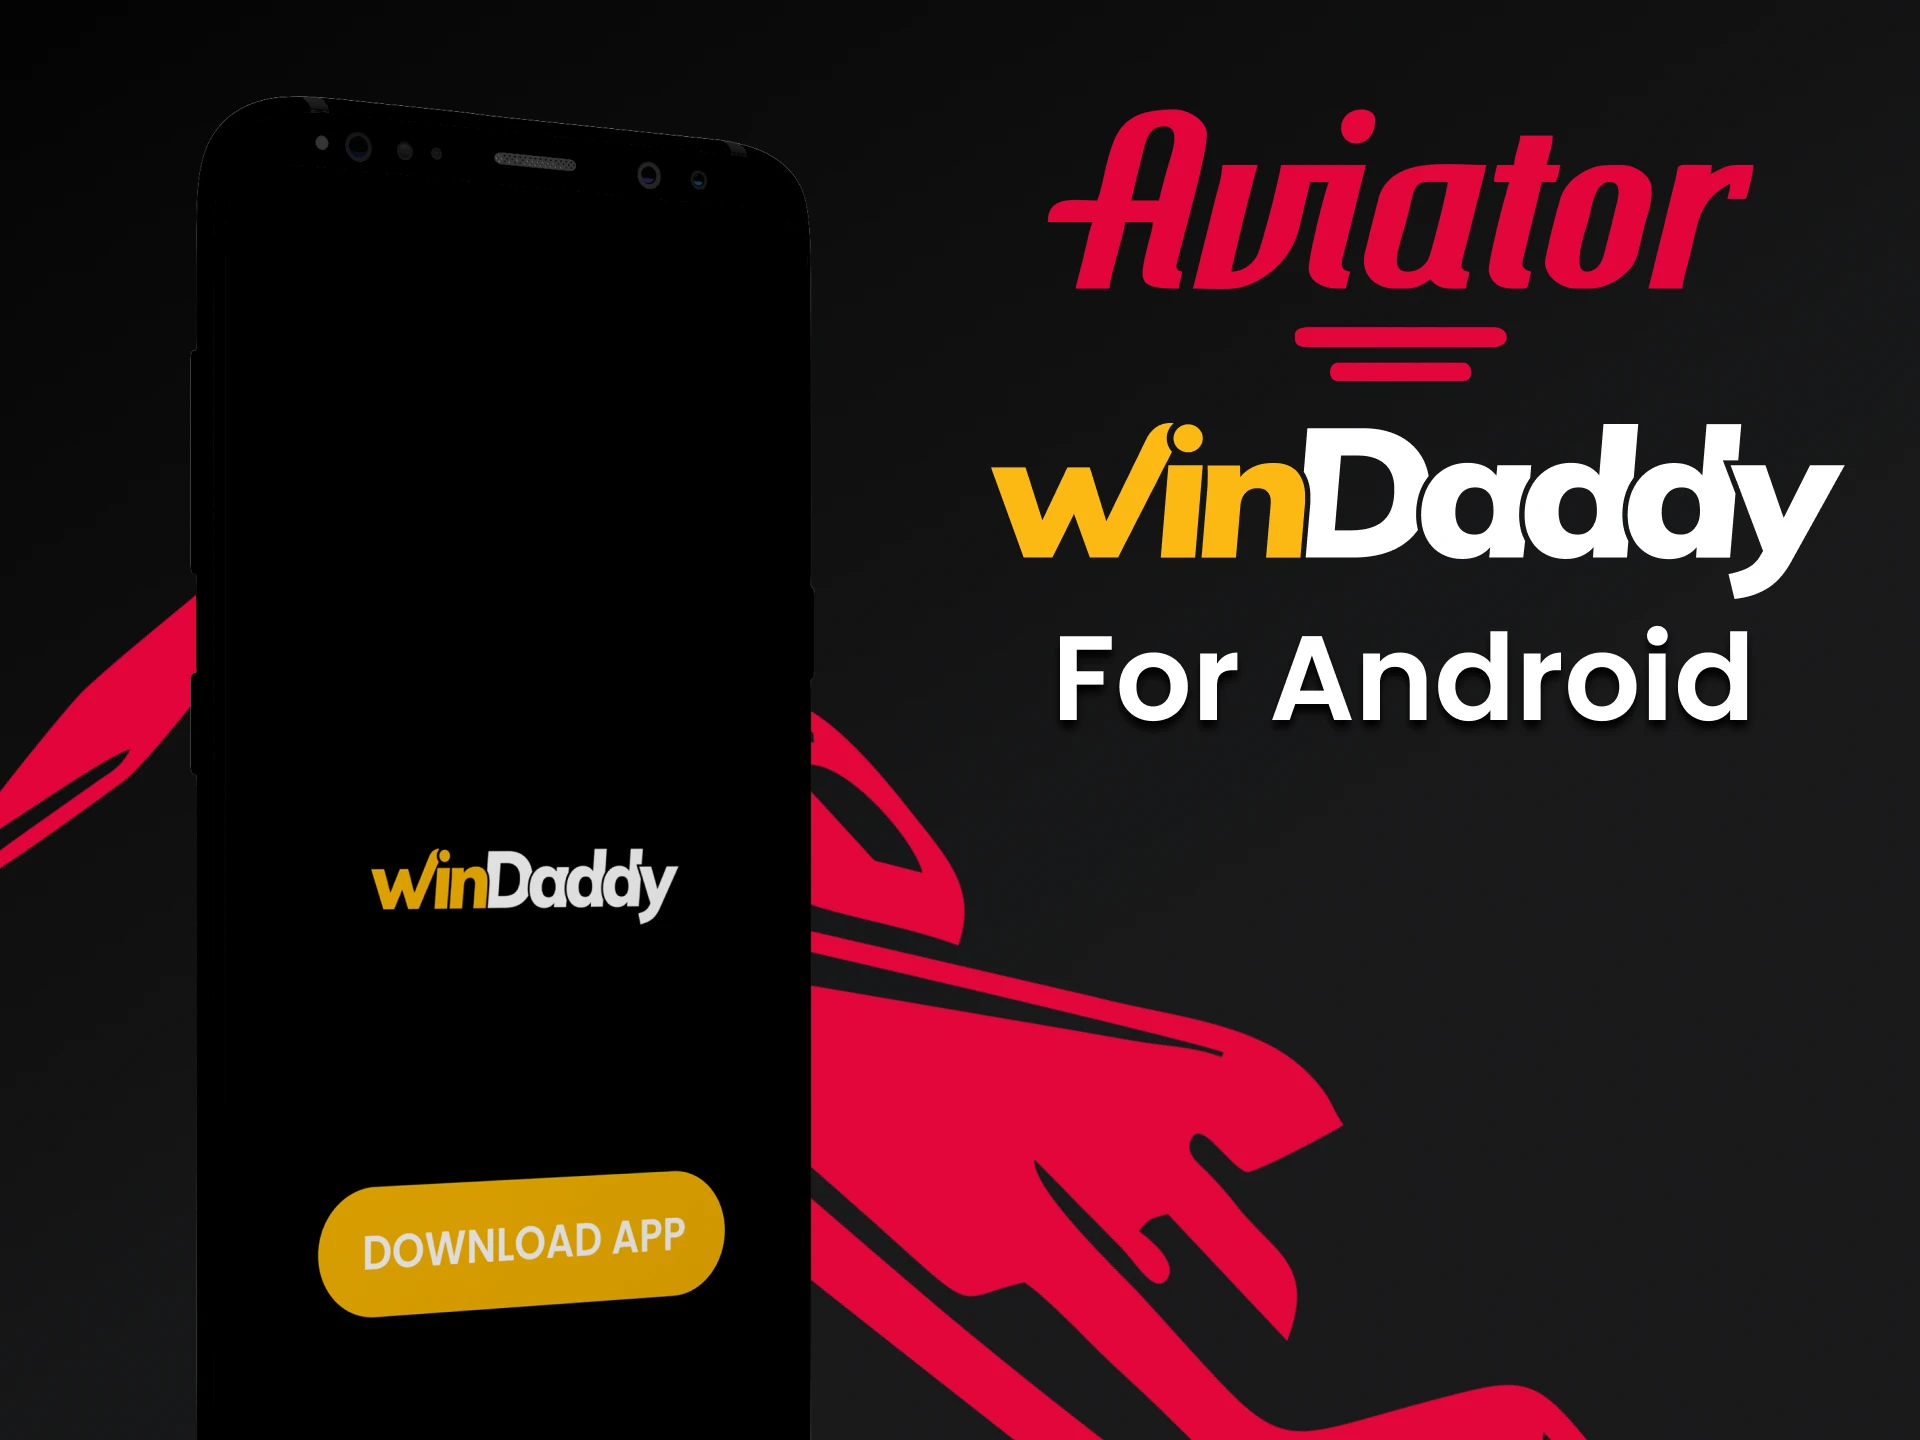 Download the WinDaddy app for Android to play Aviator.